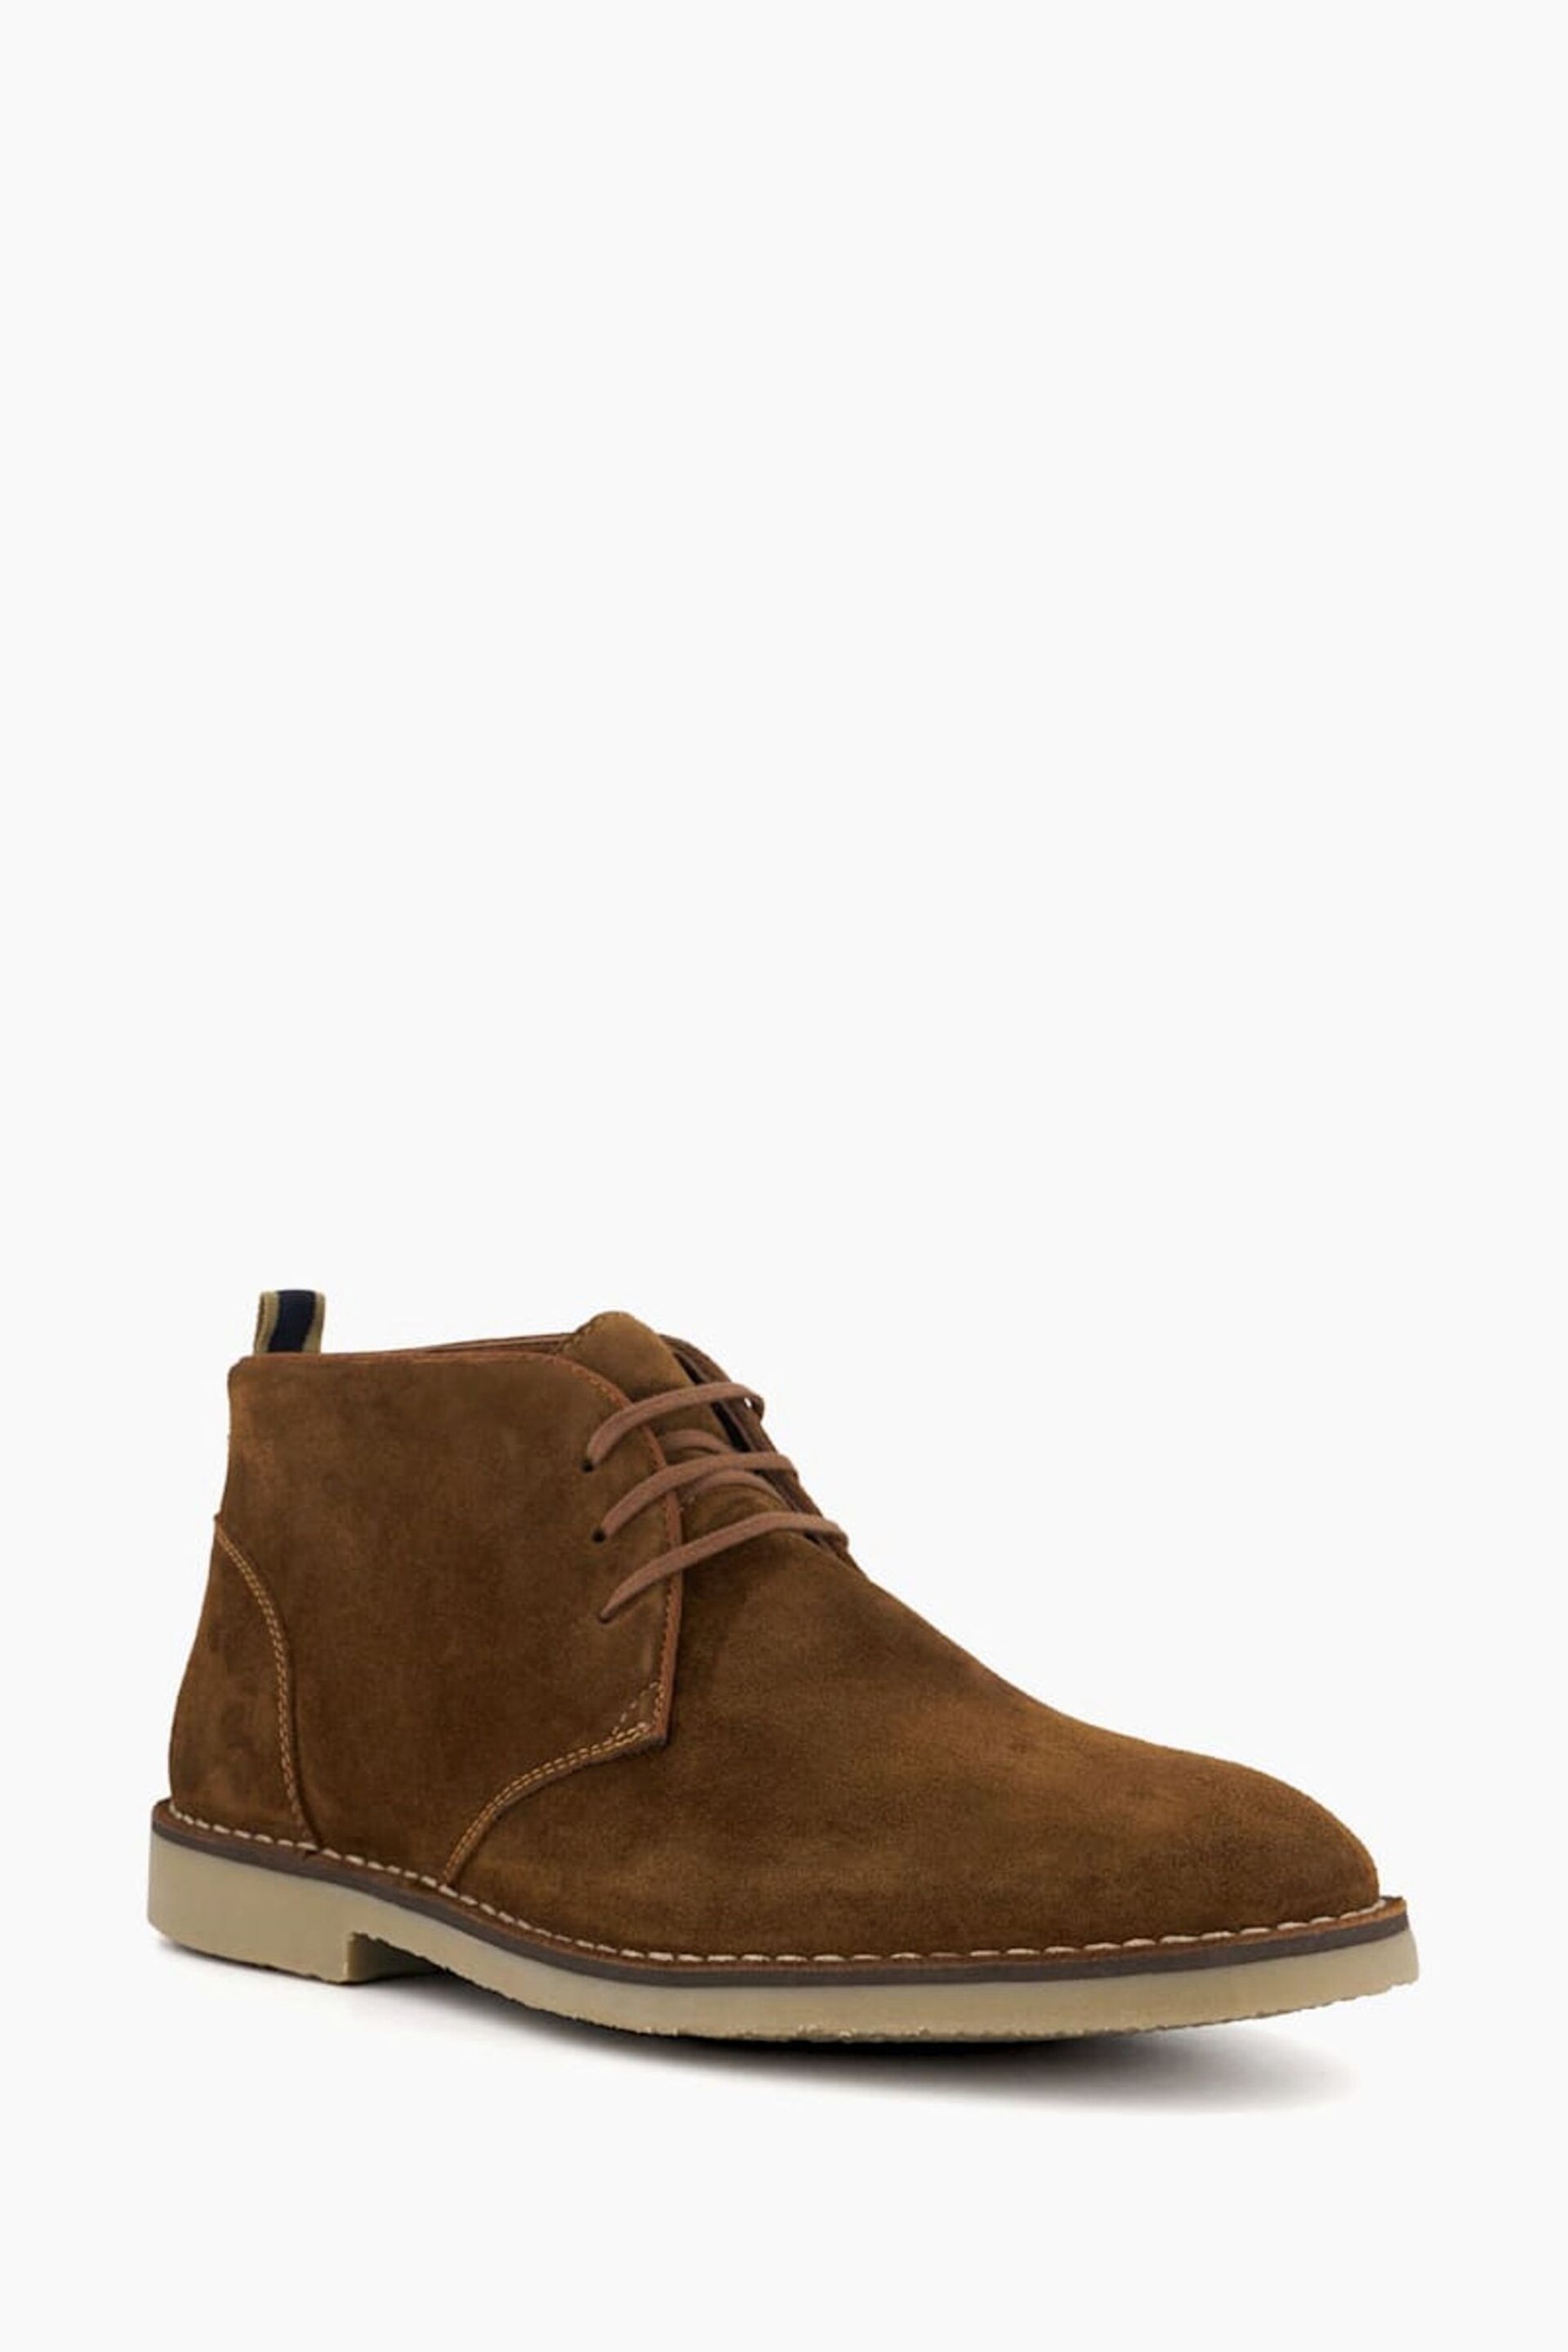 Dune London Brown Cashed Chukka Boots - Image 4 of 6